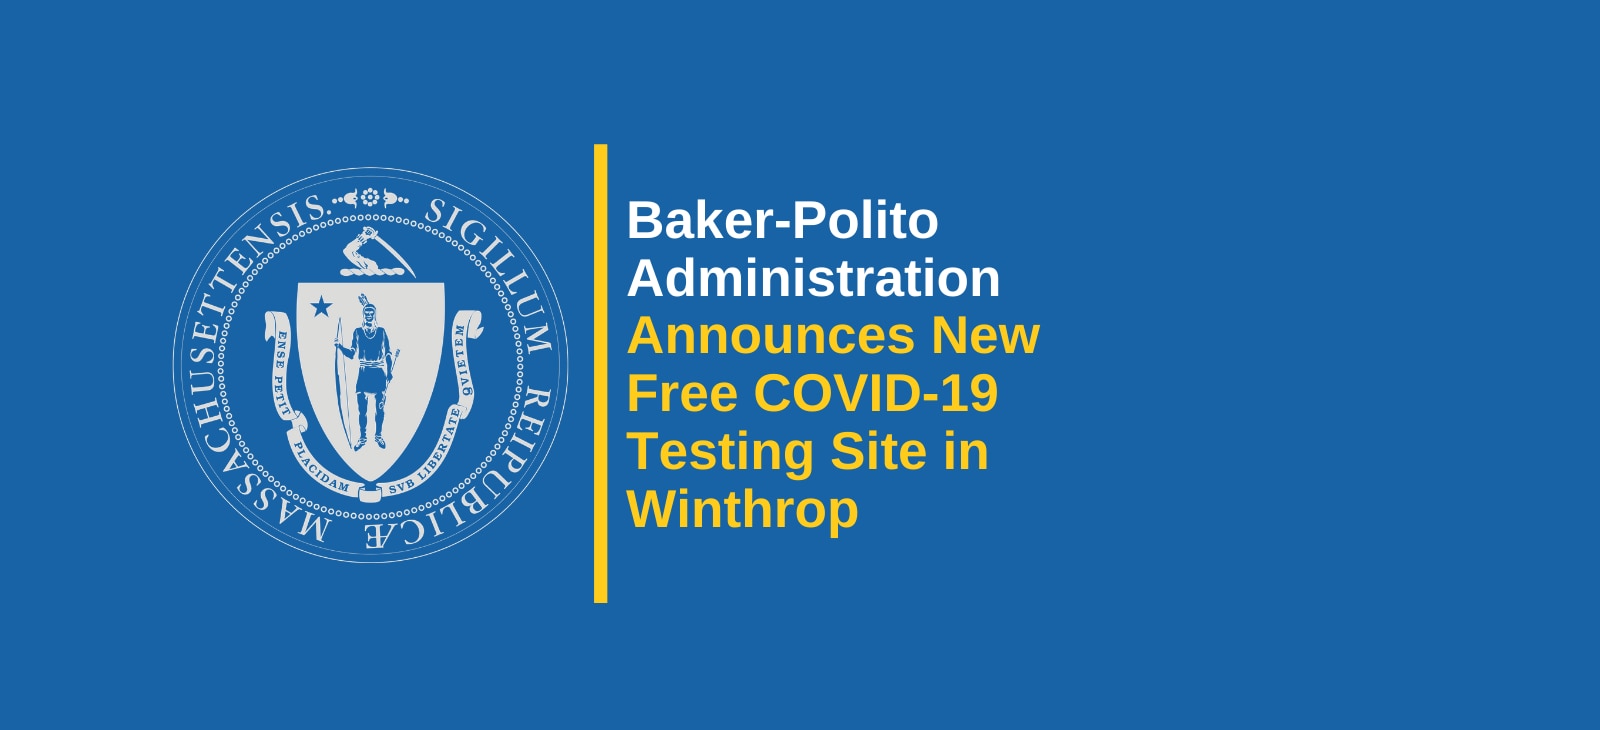 Baker-Polito Administration Announces New Free COVID-19 Testing Site in Winthrop